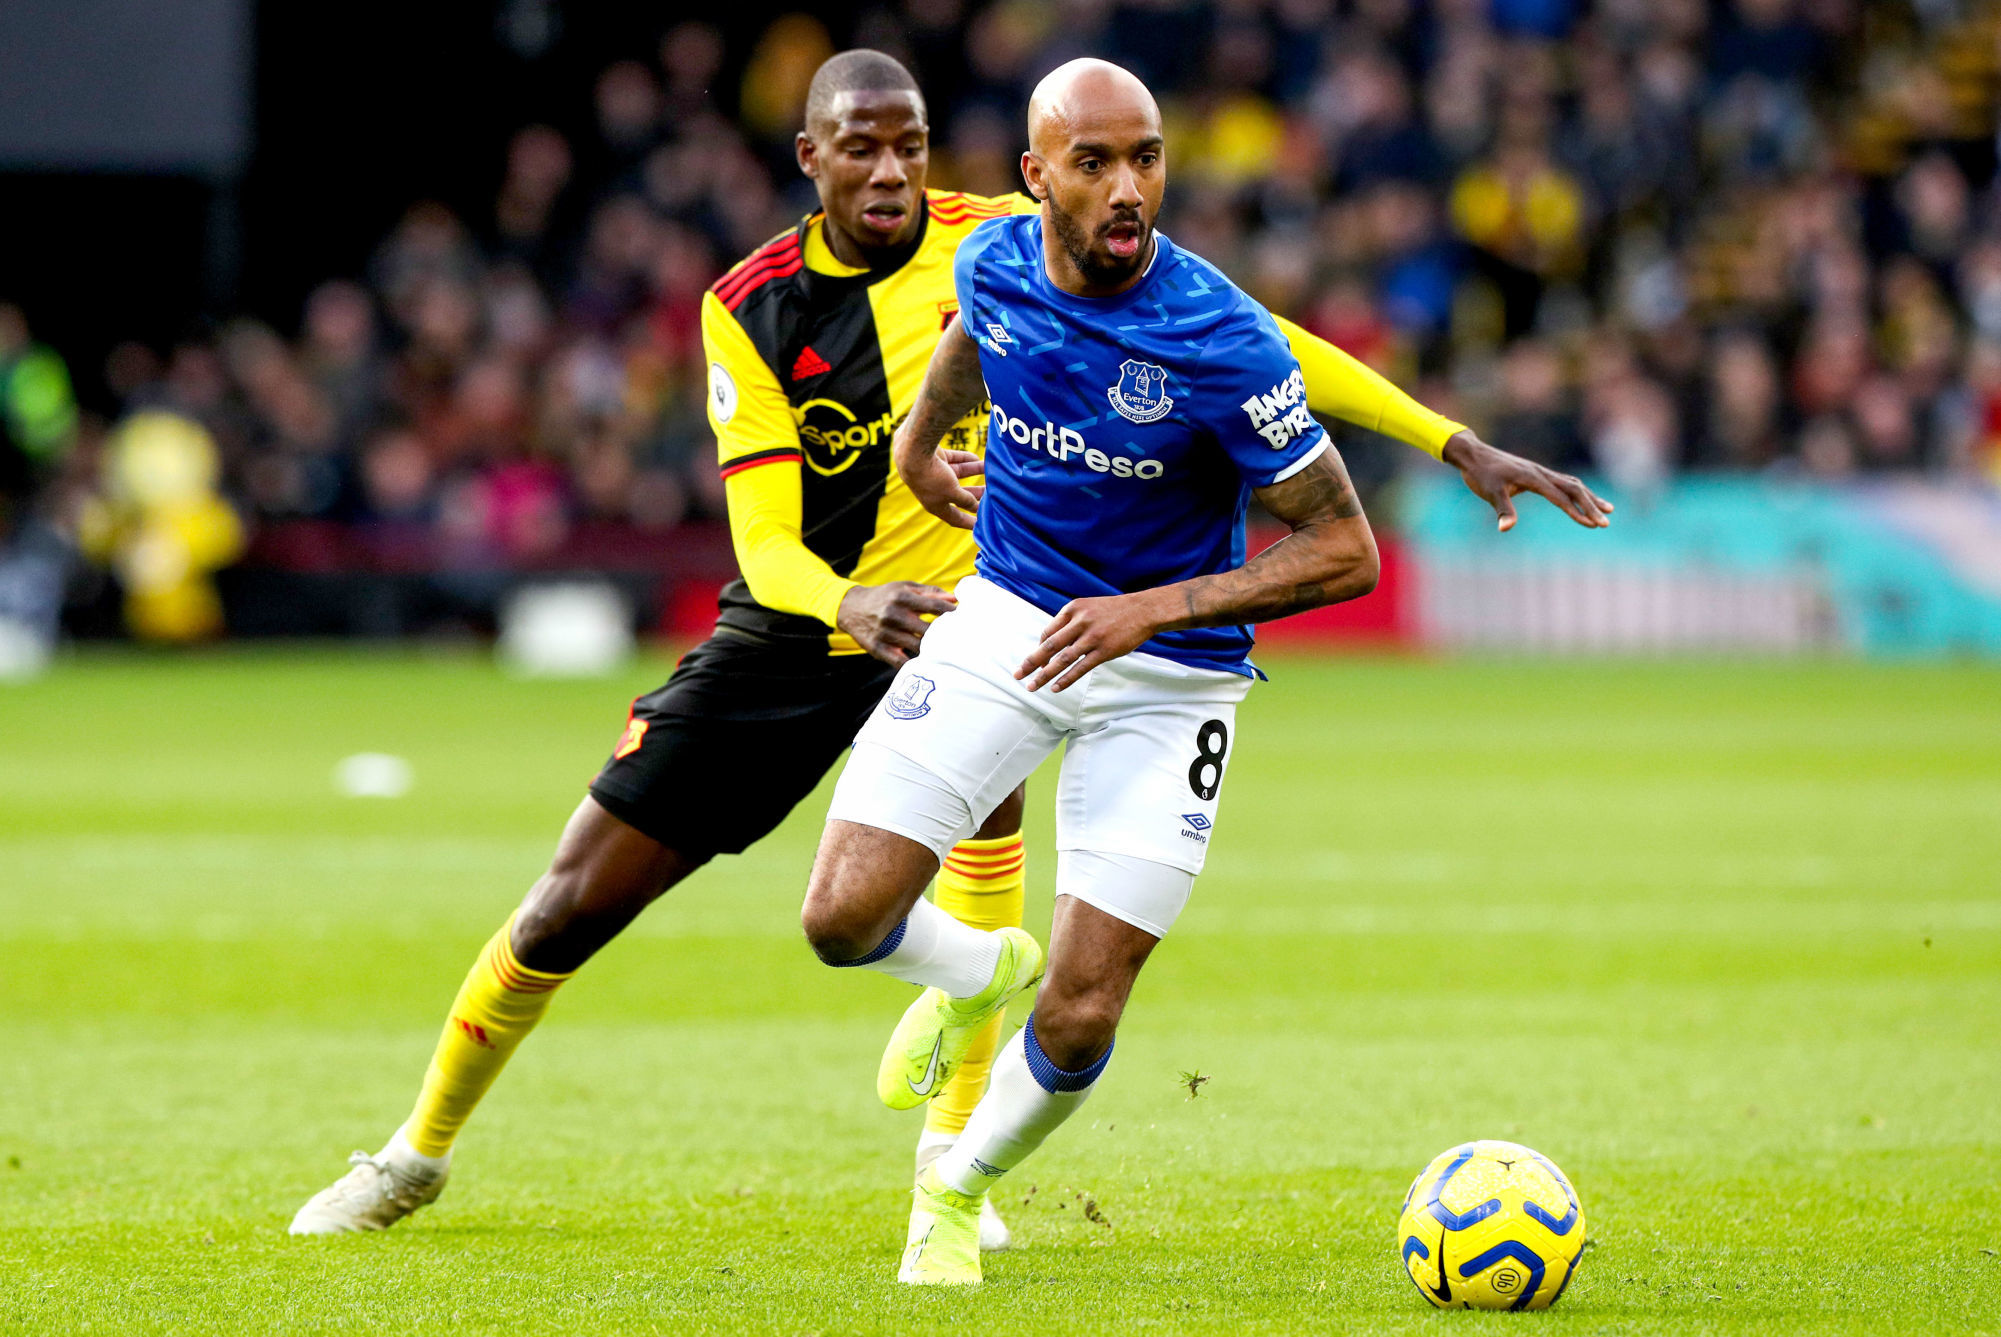 Everton's Fabian Delph (right) and Watford's Abdoulaye Doucoure battle for the ball during the Premier League match at Vicarage Road, Watford. 

Photo by Icon Sport - Vicarage Road - Watford (Angleterre)